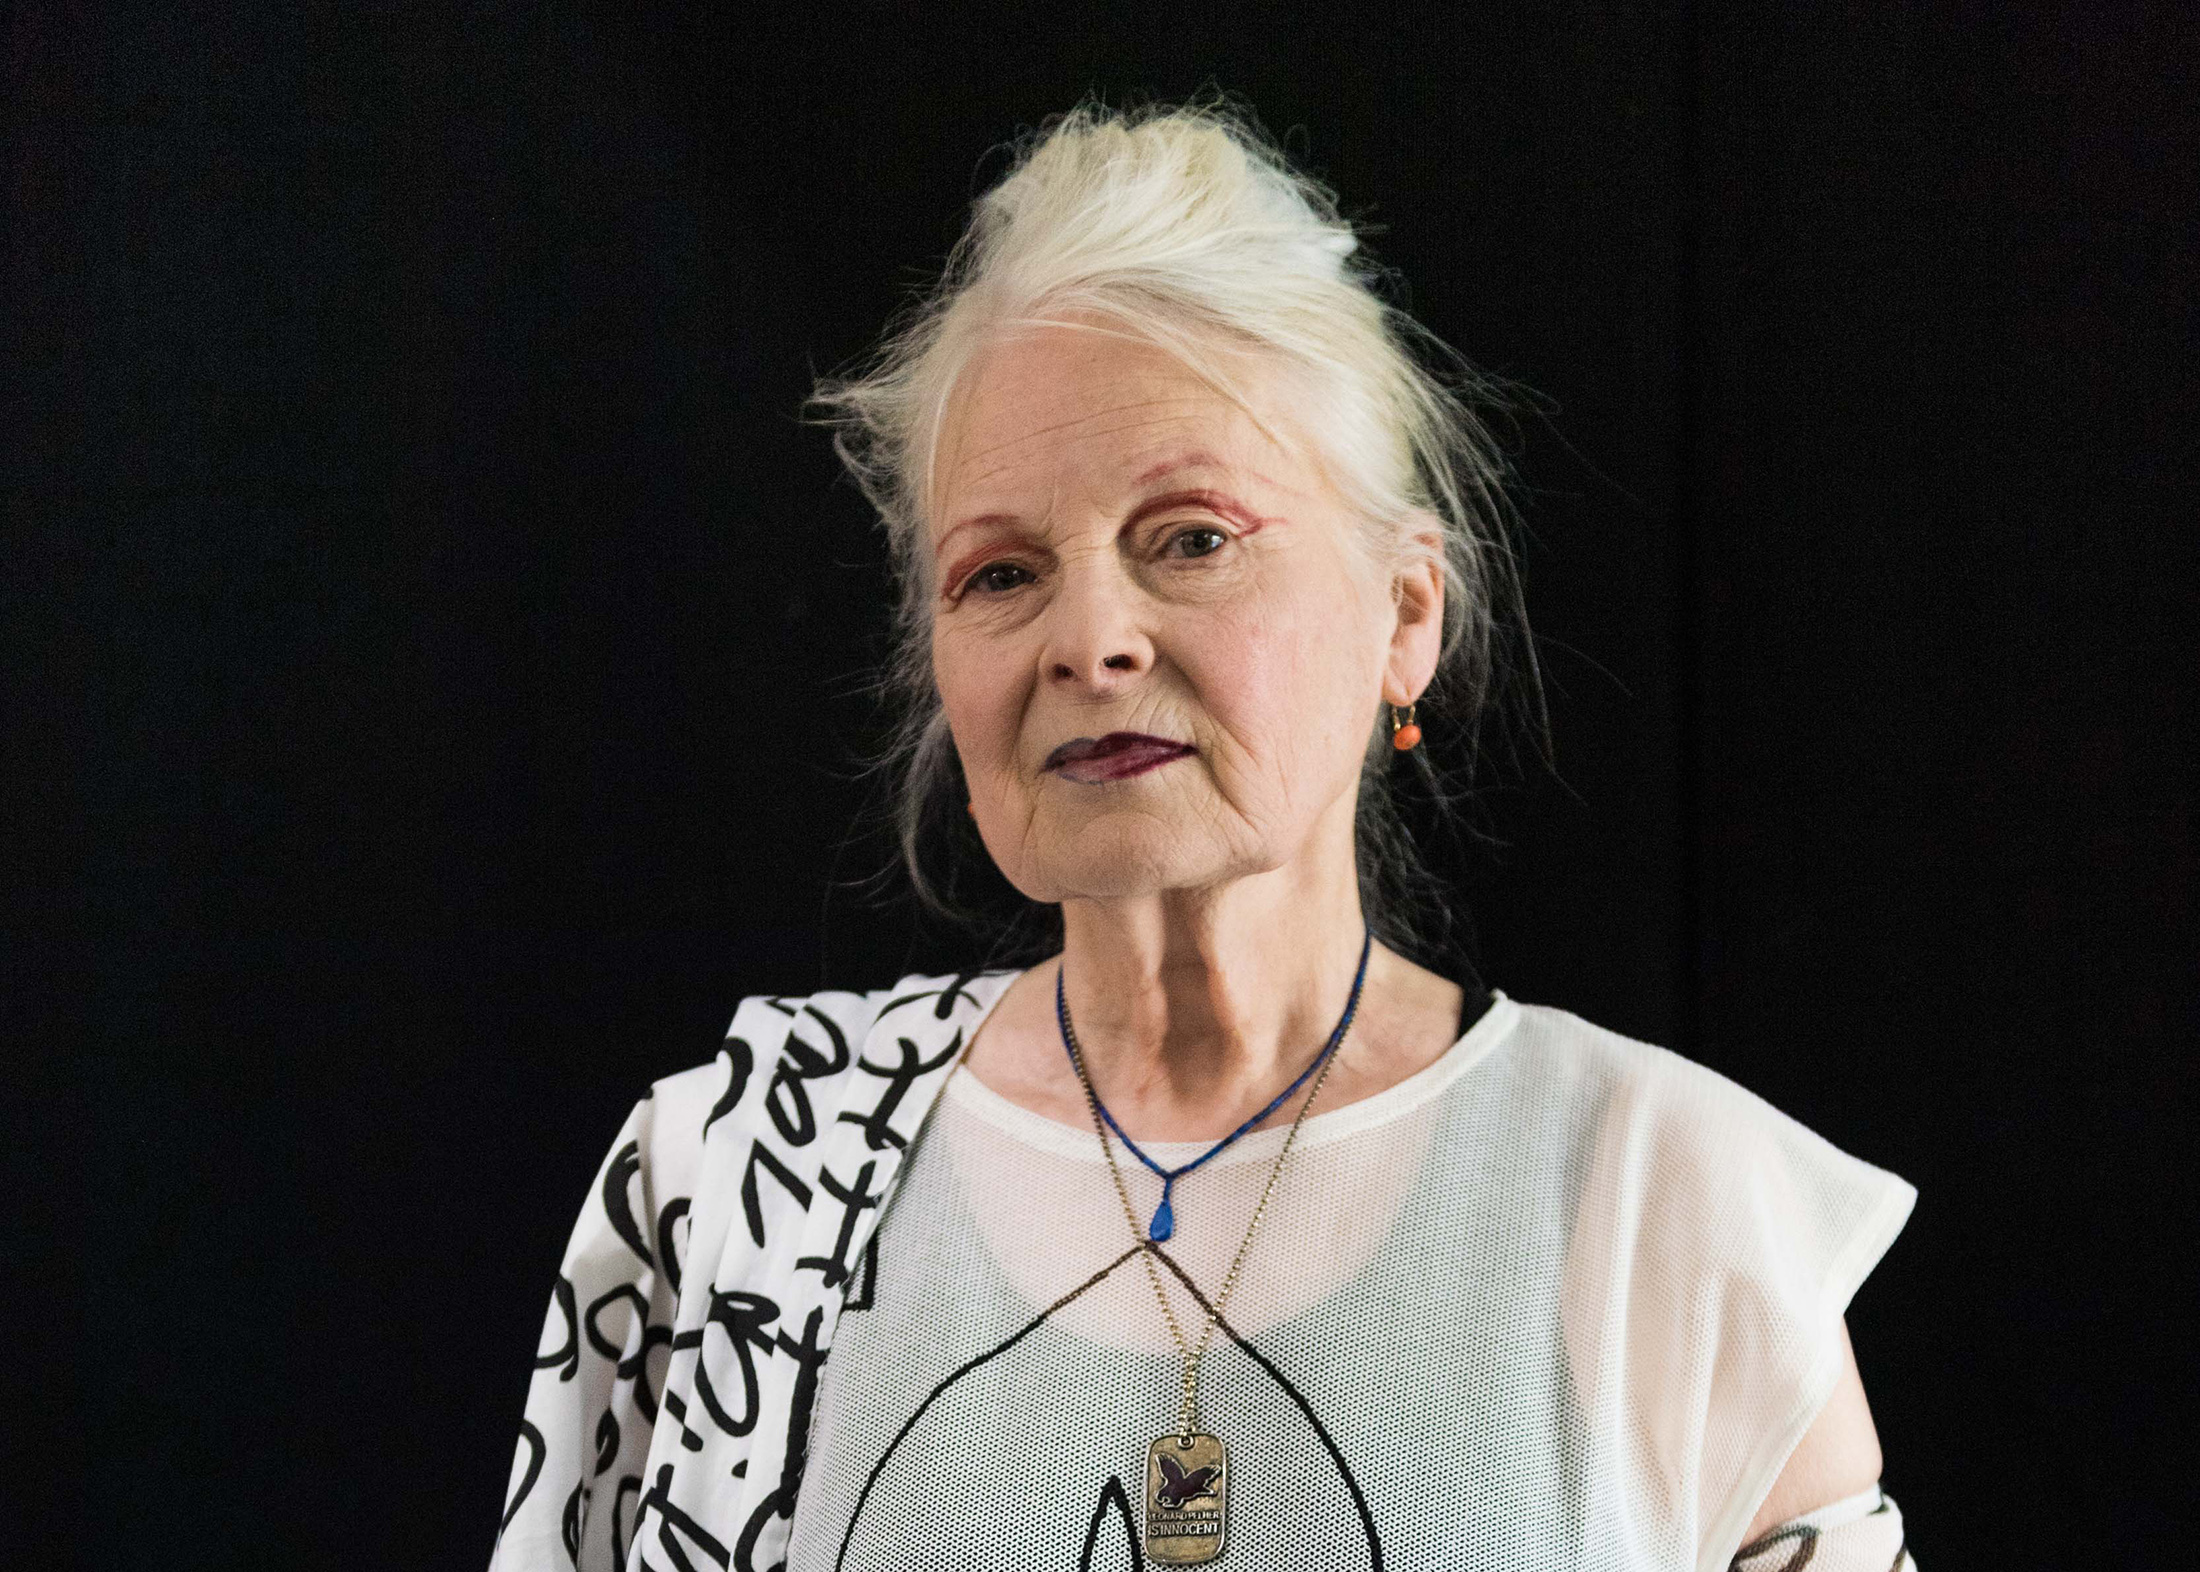 Nothing Like A Dame: A Look Back At Vivienne Westwood's Personal Style